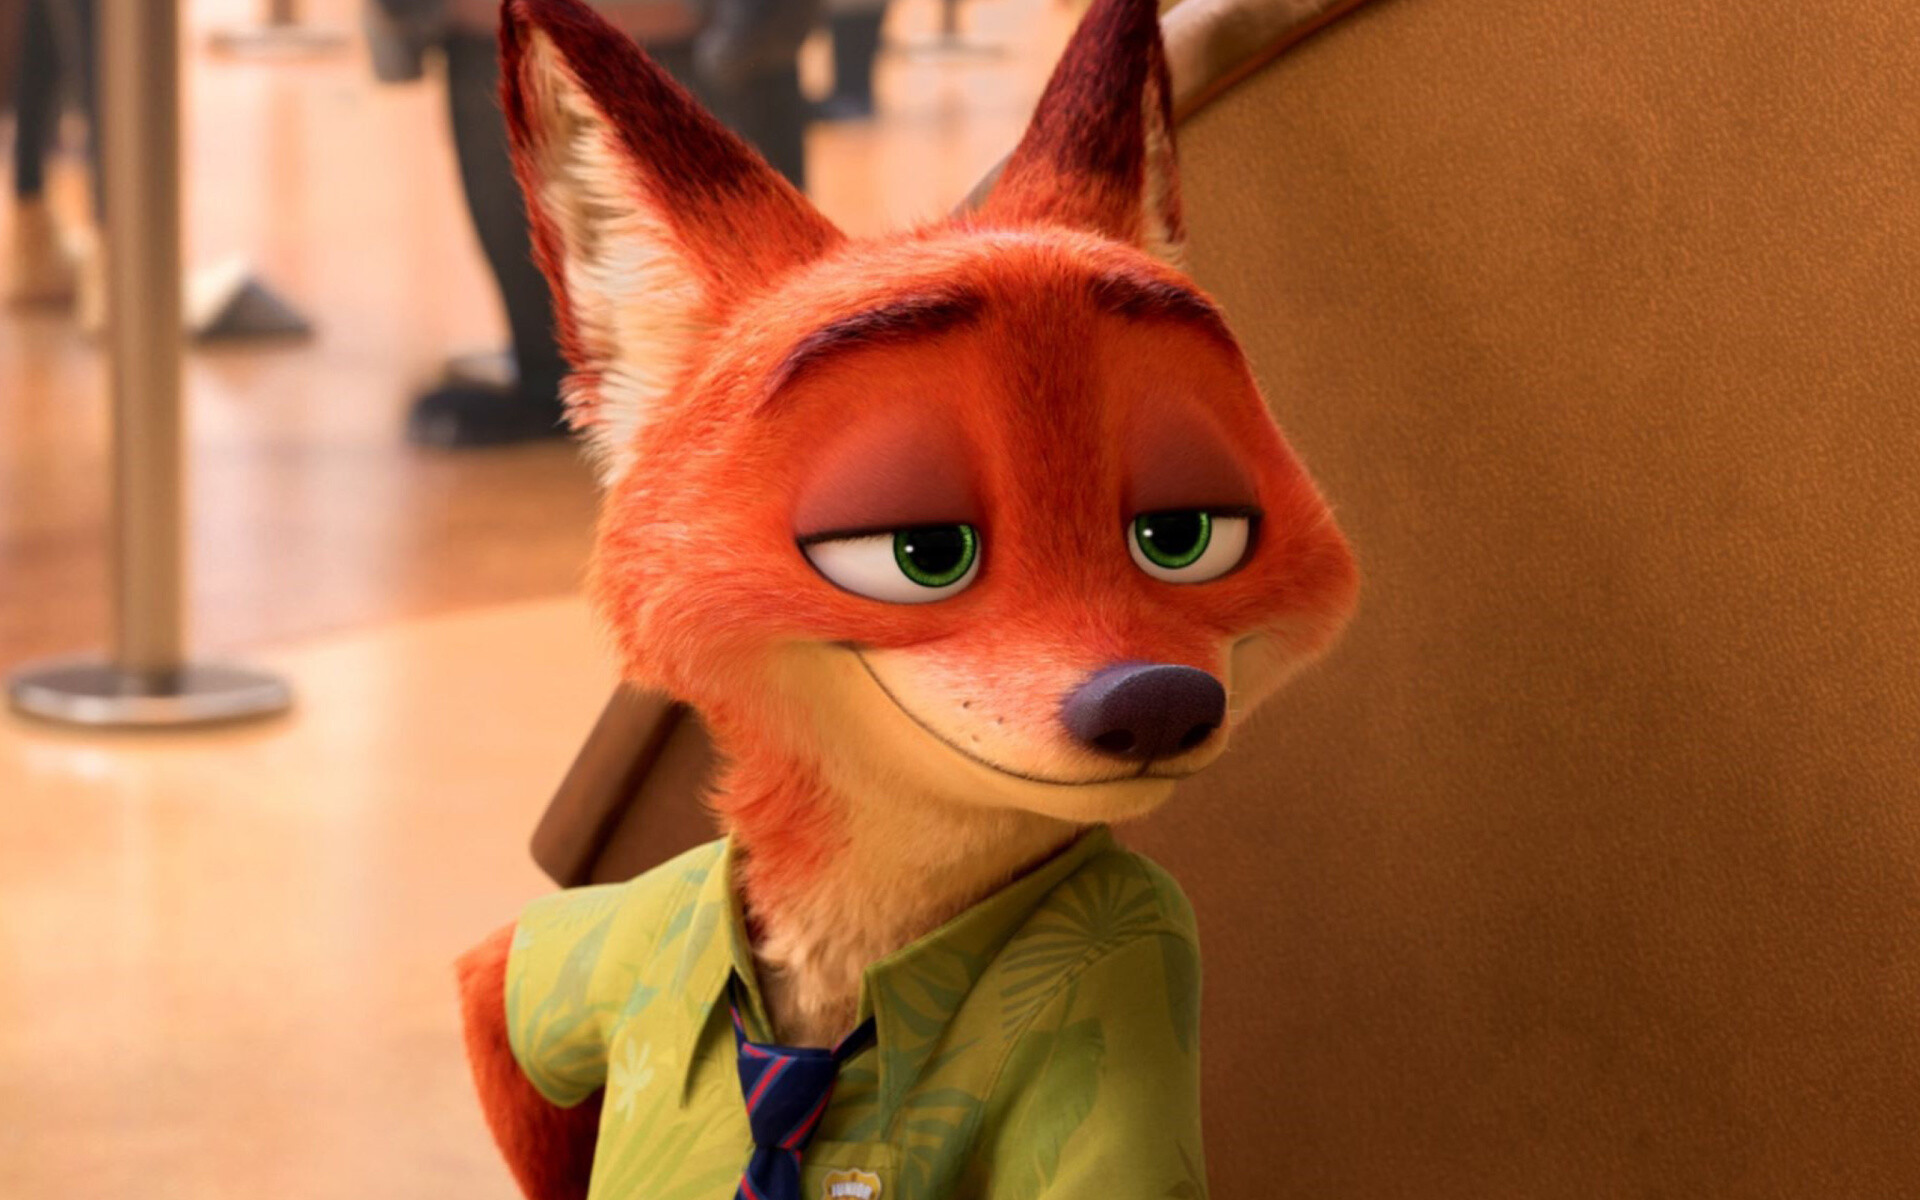 Zootopia: Jason Bateman as Nick Wilde, a sly red fox who is a small-time con artist. 1920x1200 HD Background.